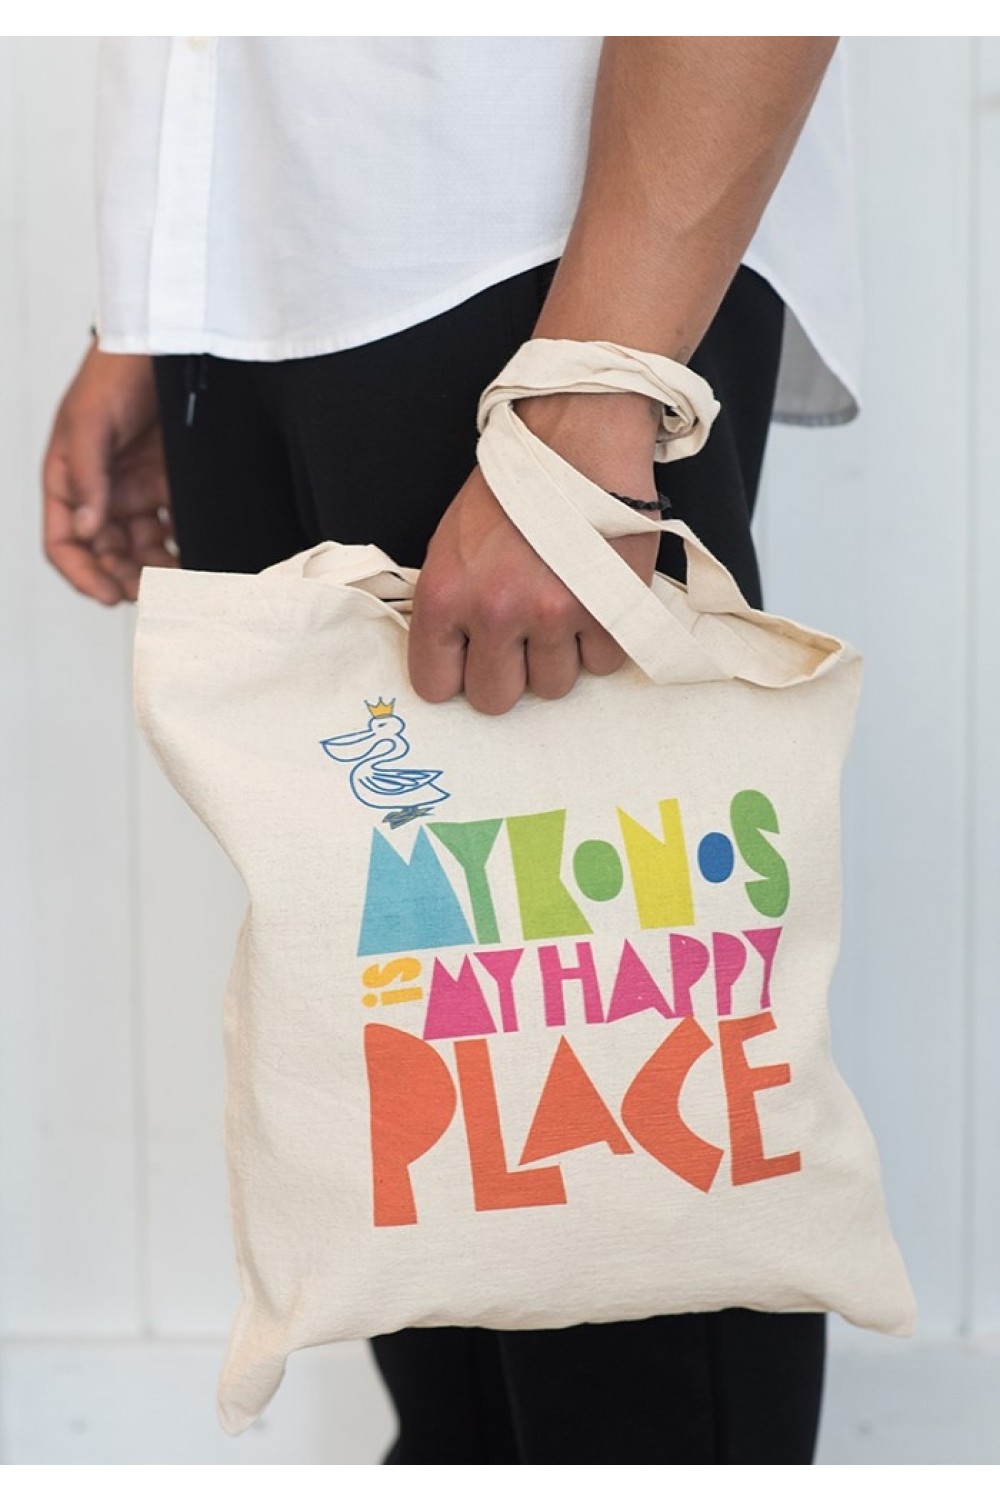 THE "HAPPY PLACE" SHOPPING BAG 